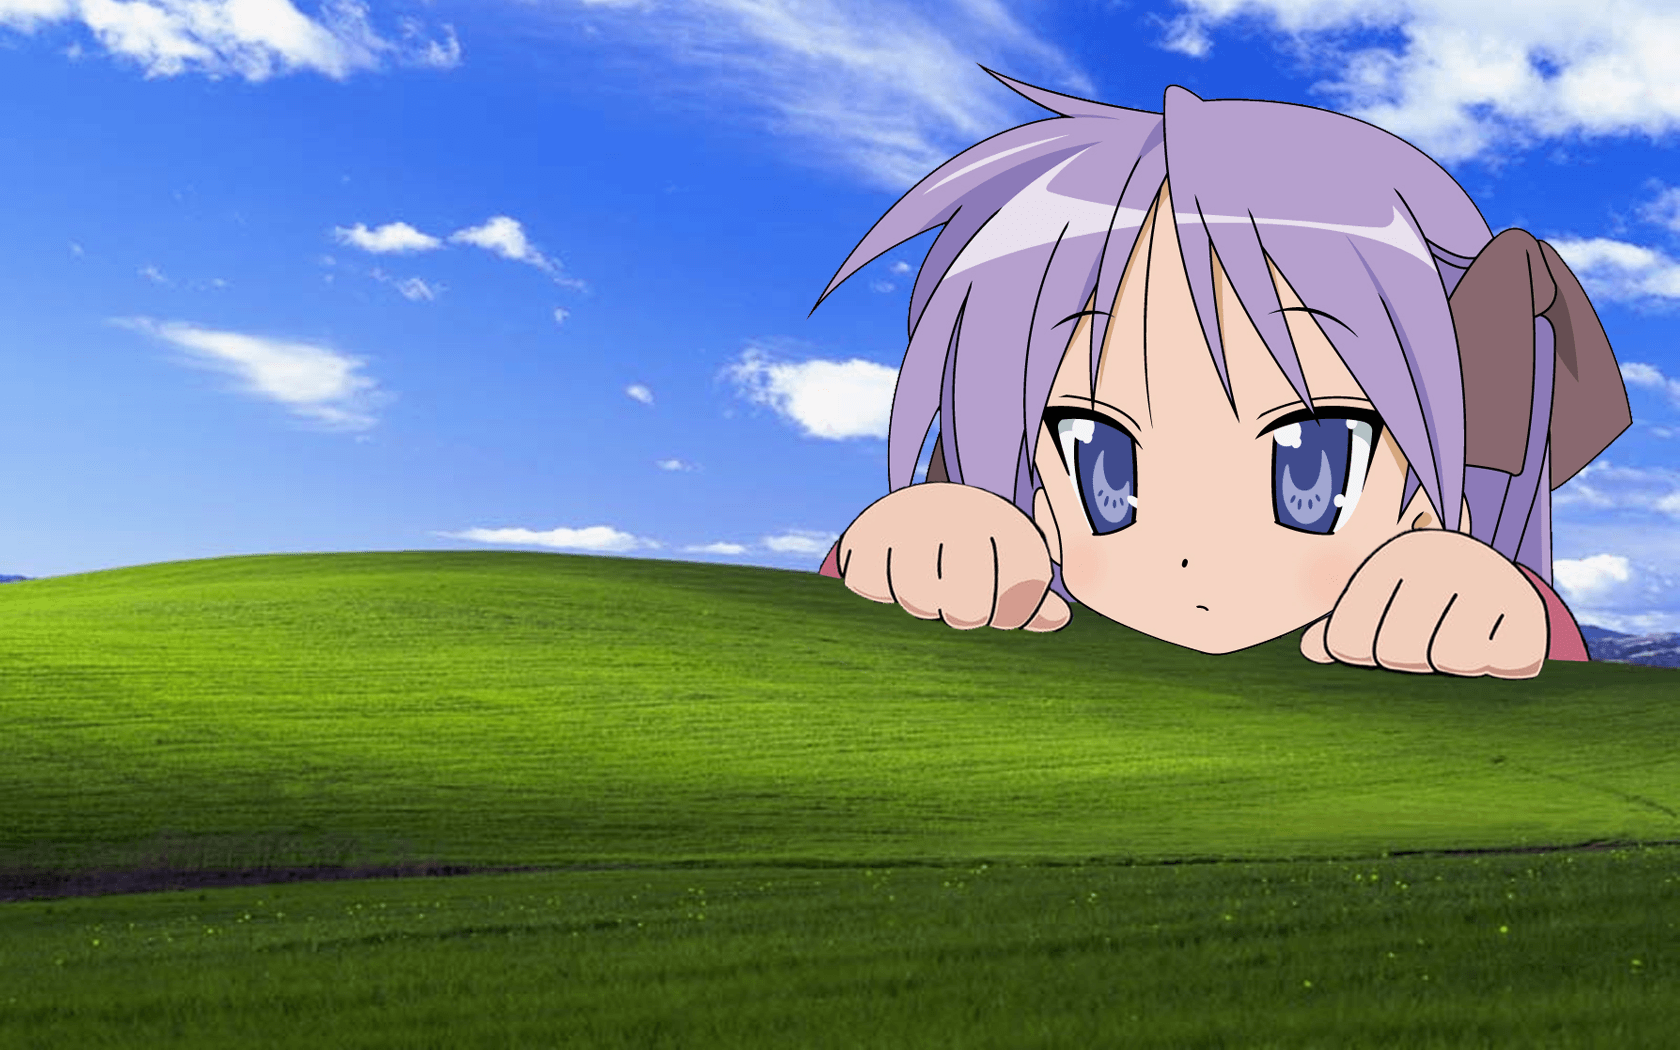 Windows Anime Wallpapers - Top Free Windows Anime Backgrounds ...